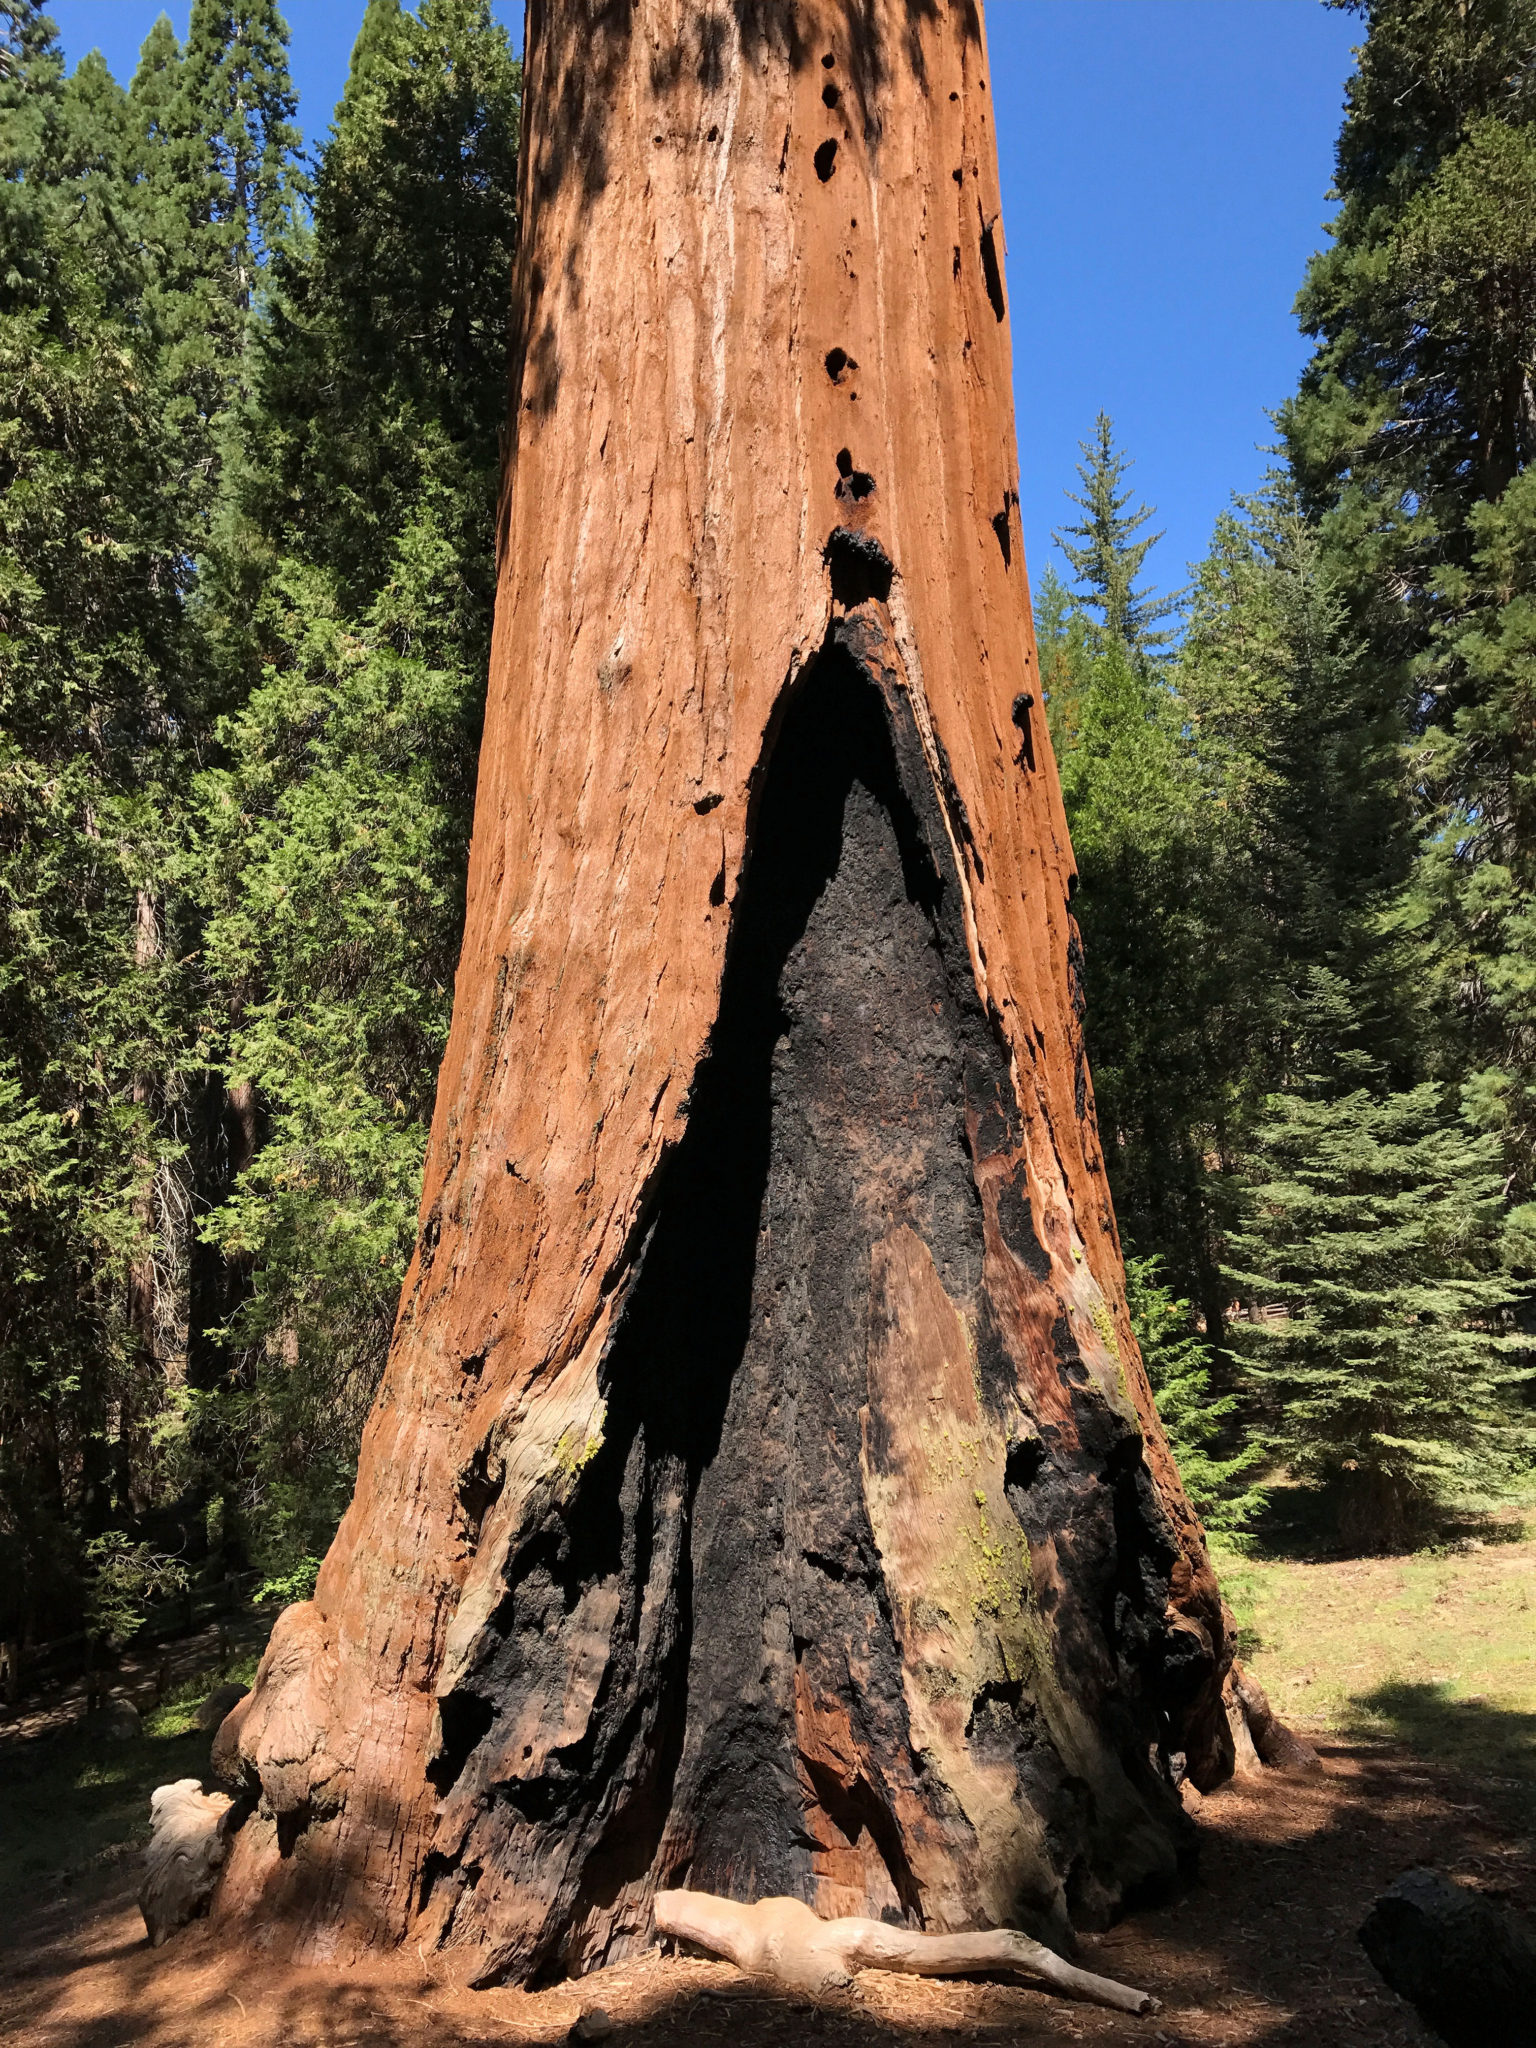 The burnt trunk of General Grant